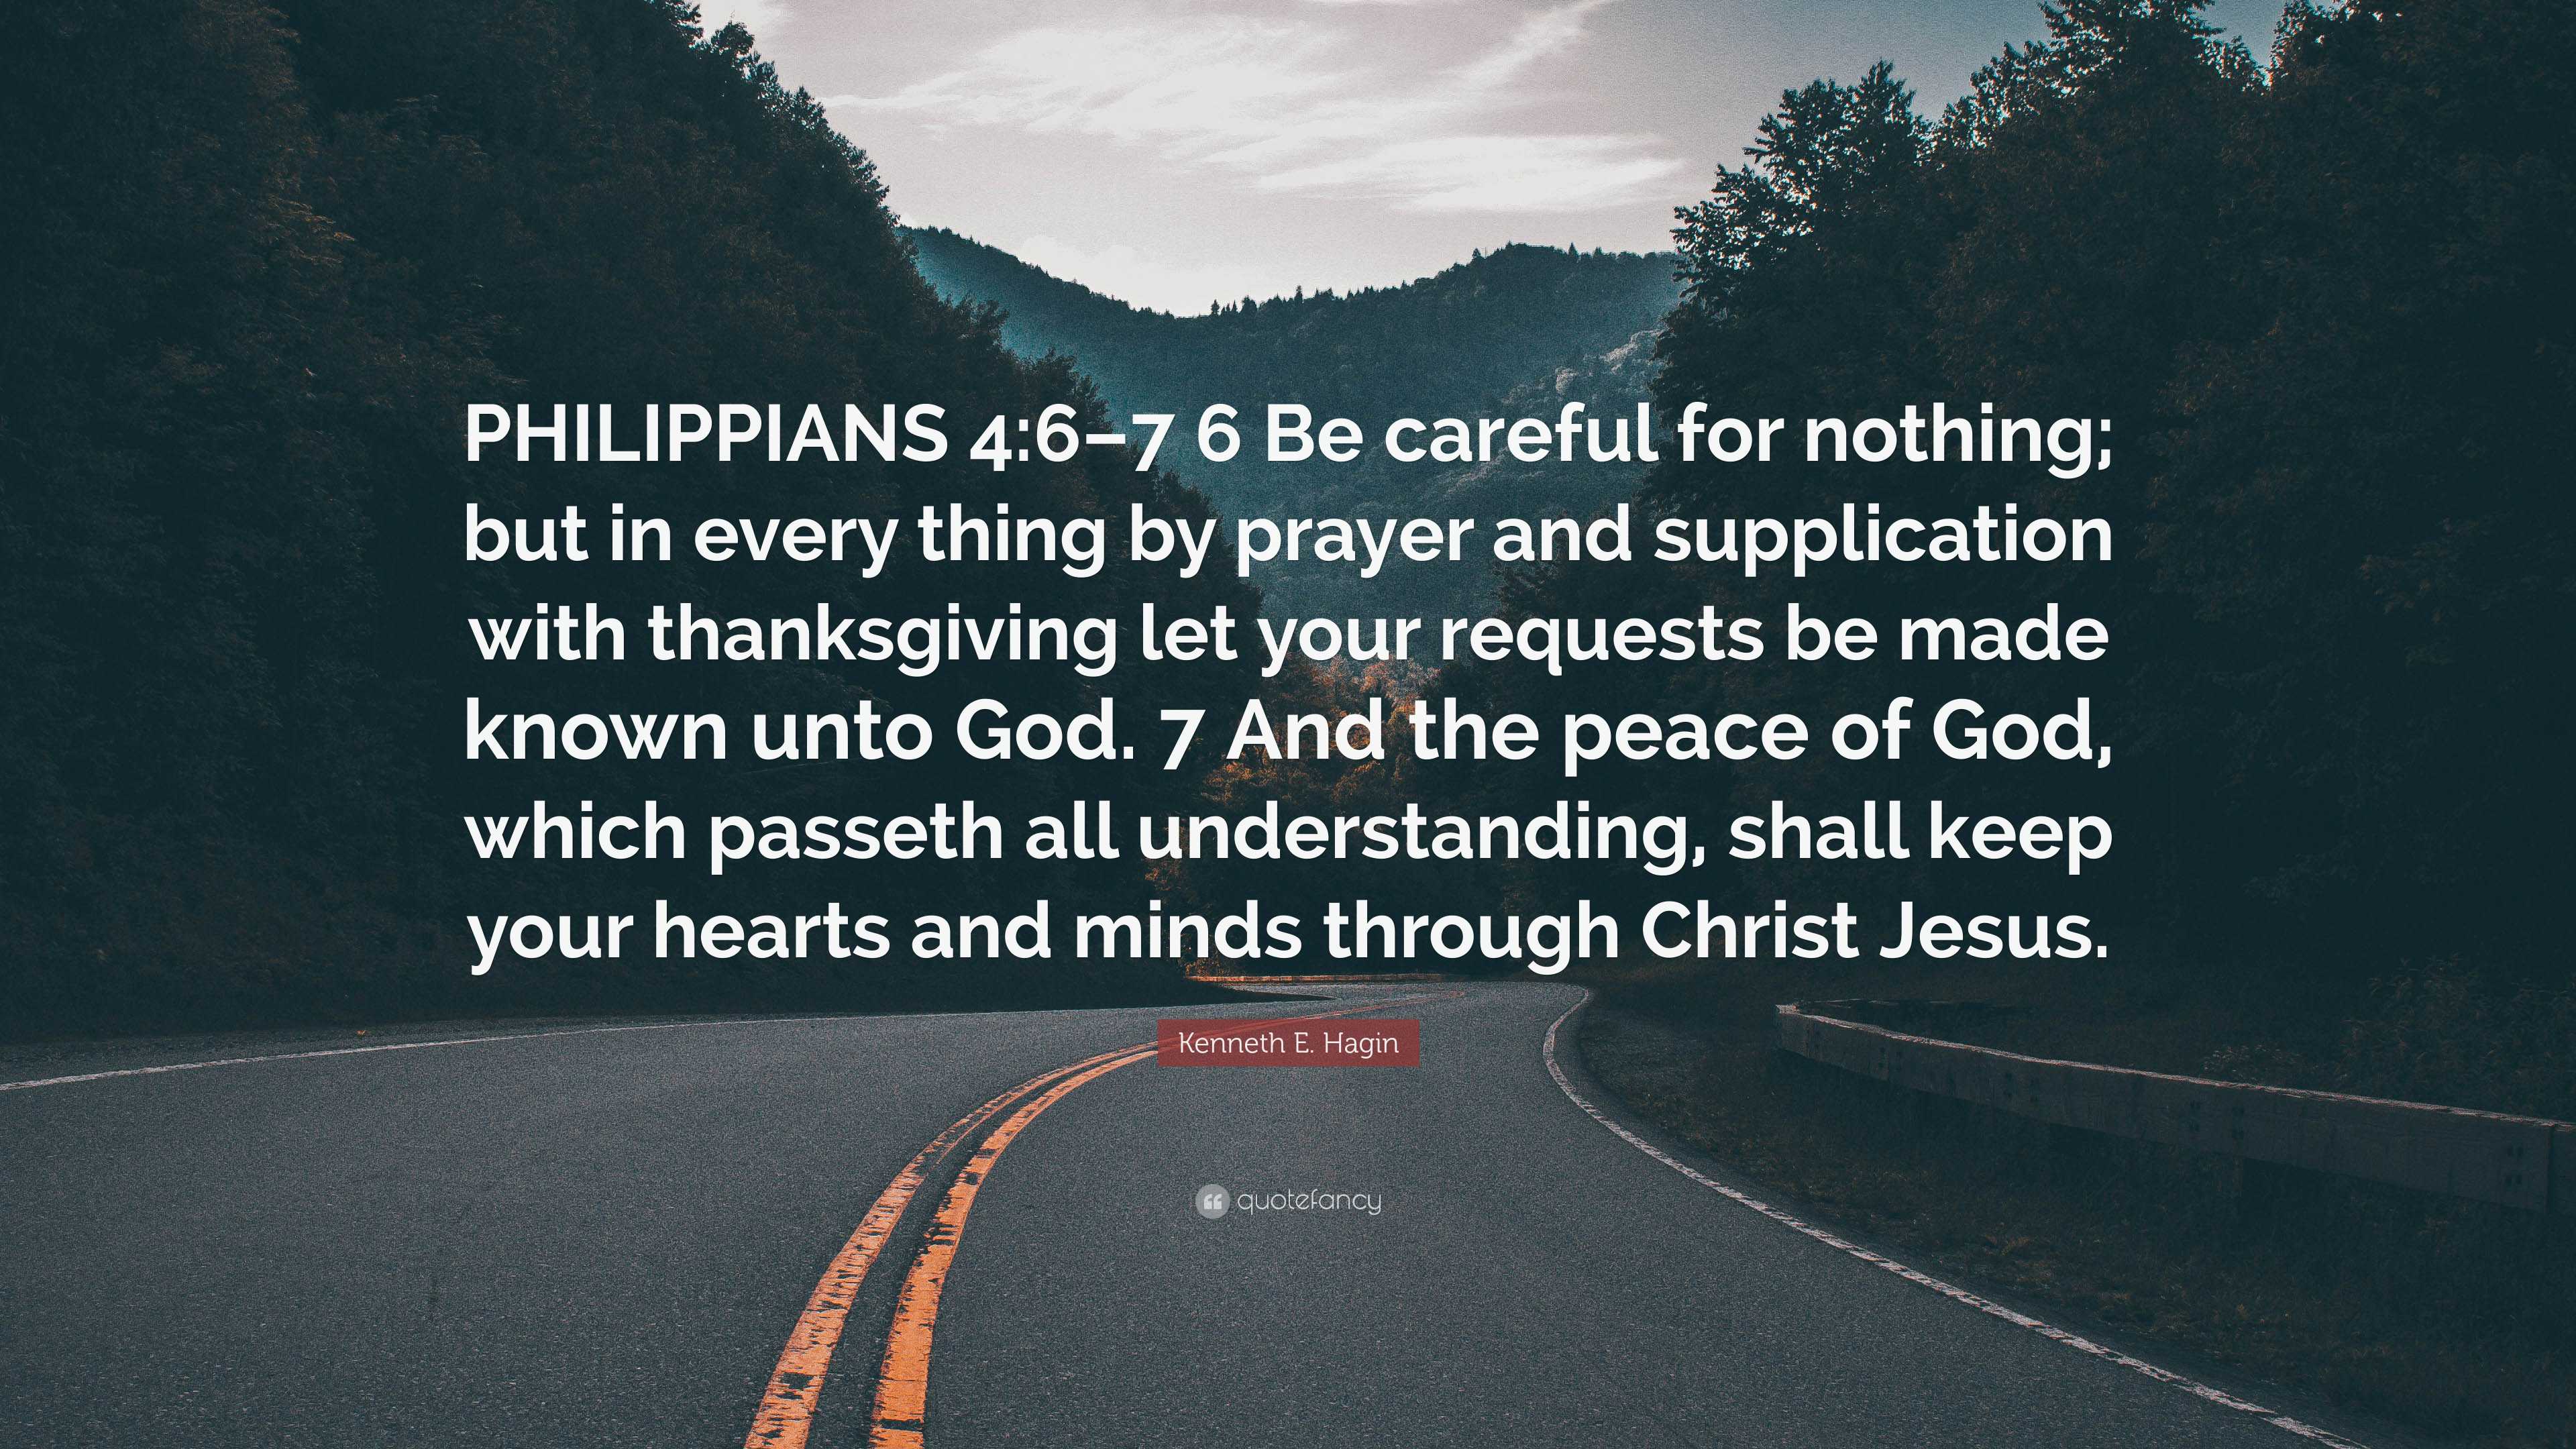 Kenneth E. Hagin Quote: “PHILIPPIANS 4:6–7 6 Be careful for nothing; but in  every thing by prayer and supplication with thanksgiving let your req...”